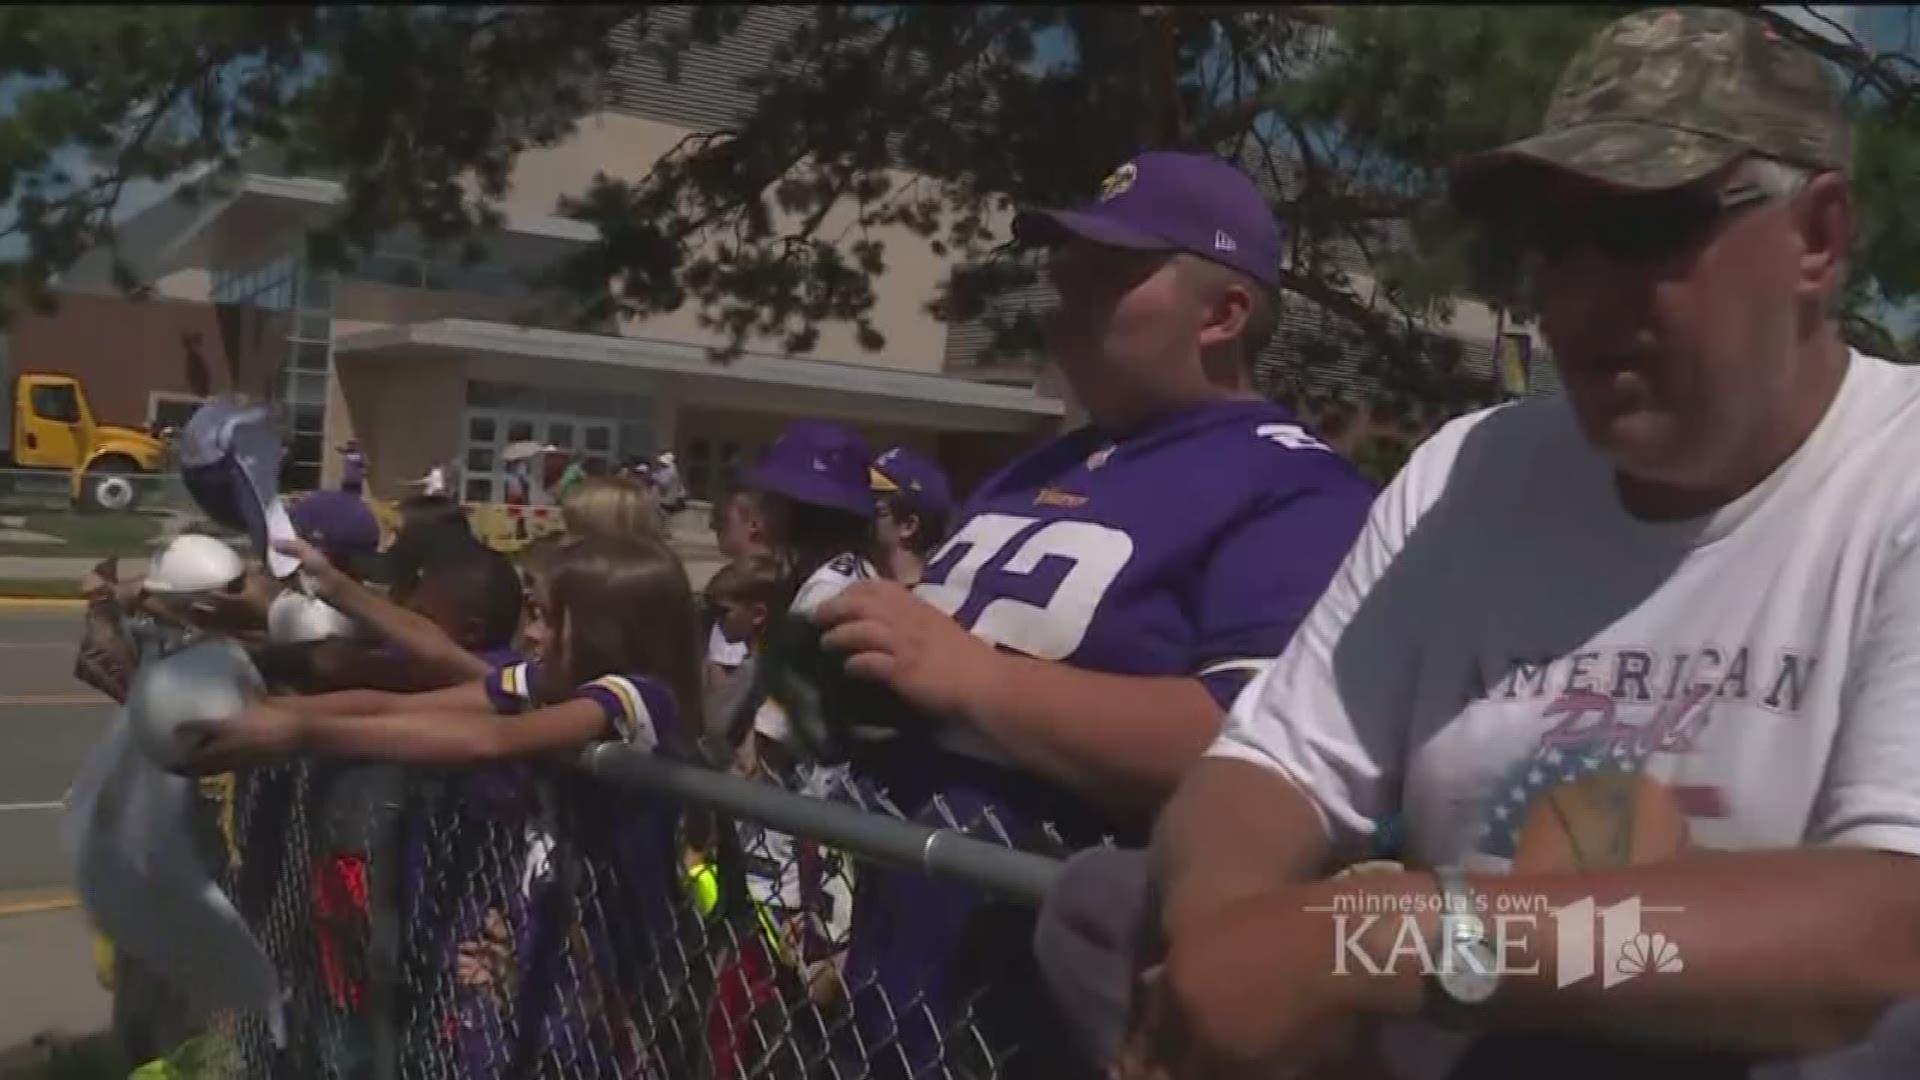 After more than 50 years on the campus of Minnesota State University, Mankato, the Minnesota Vikings have ended their final Training Camp there. http://kare11.tv/2wryKjo